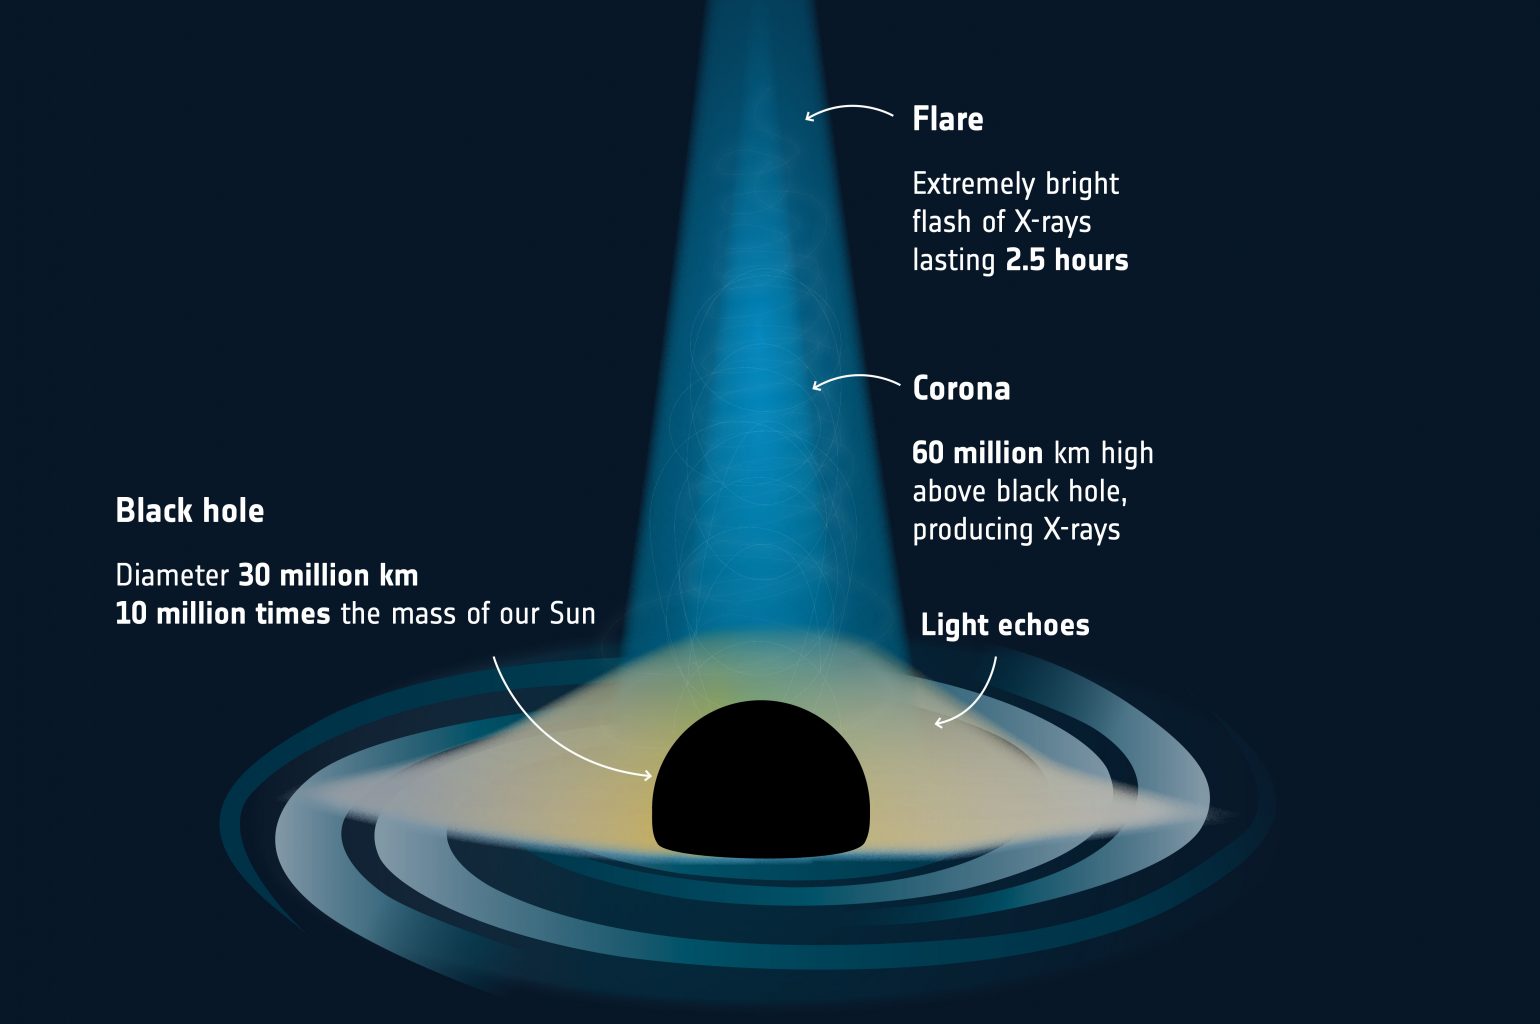 The diagram shows the corona of a black hole, producing X-ray flares, and their light "echo" reflected from the accretion disk. Credit: ESA